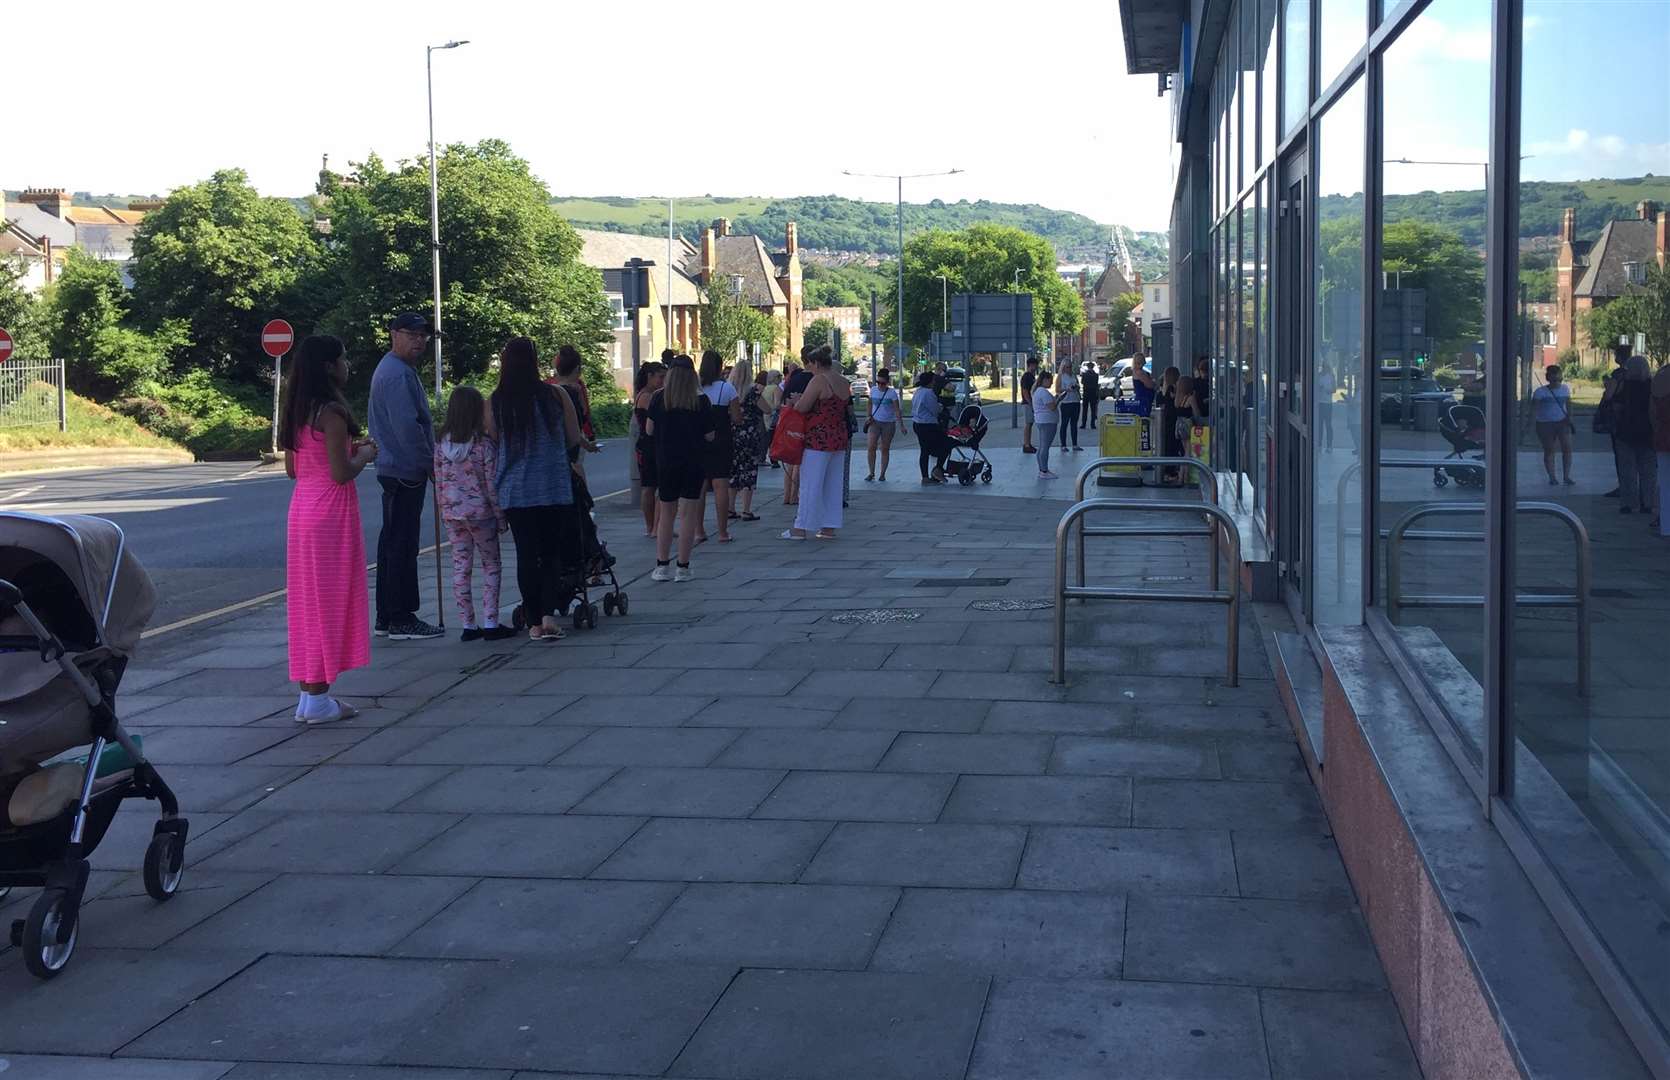 Primark proved particularly popular with shoppers queuing in Folkestone from around 9.30am